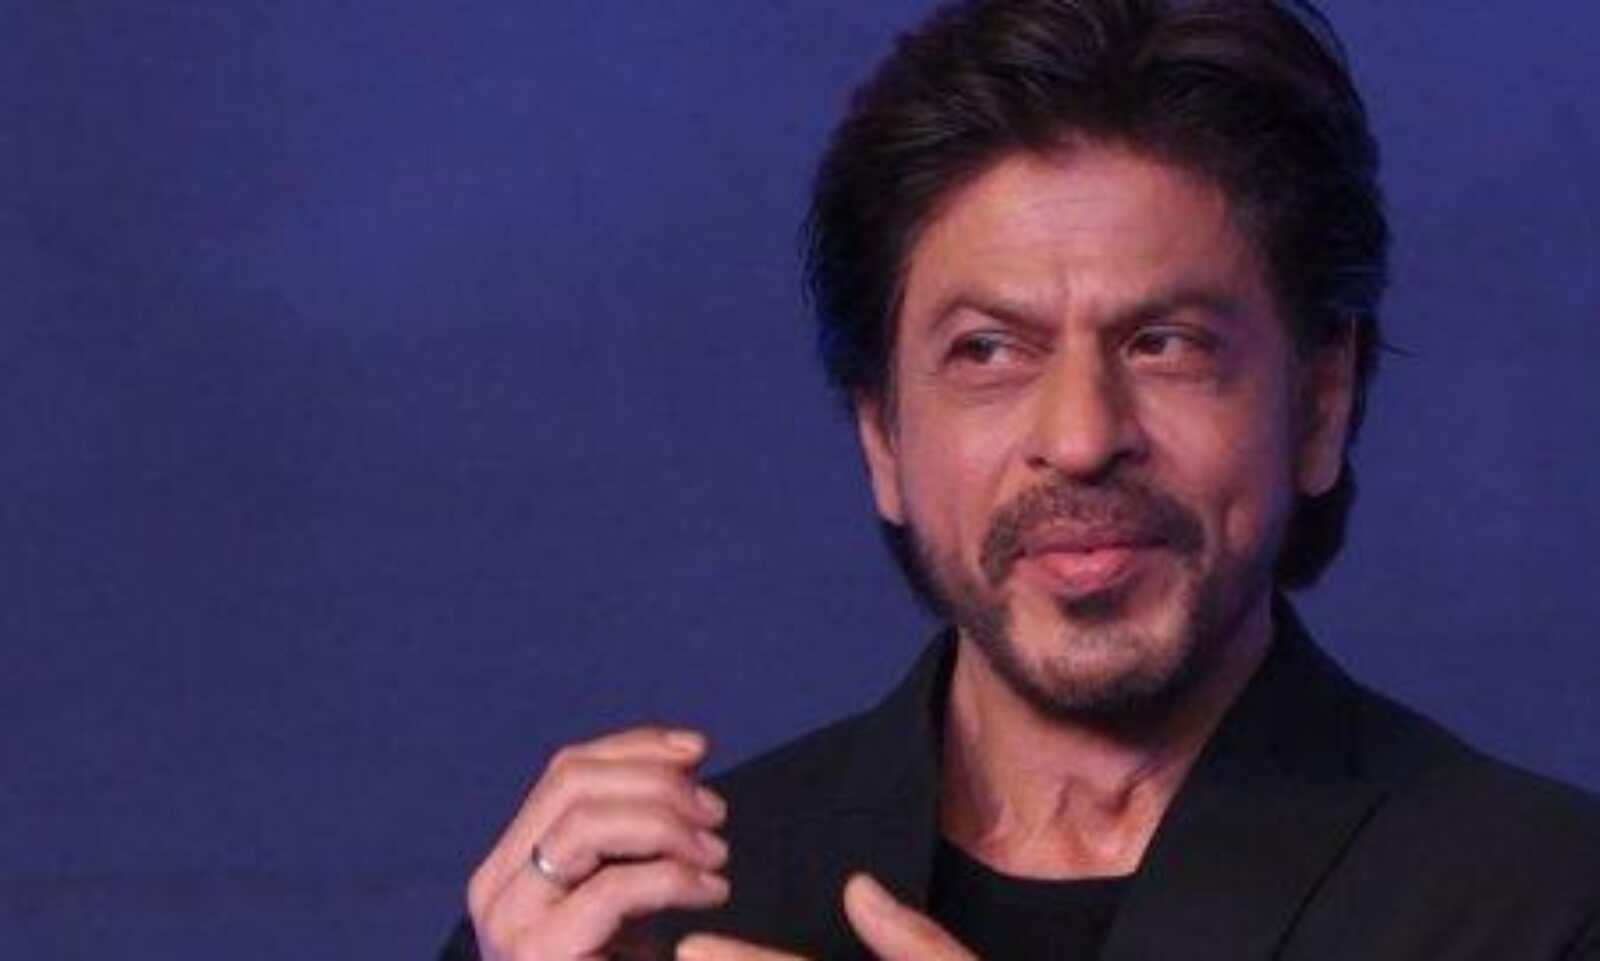 Shah Rukh Khan's total wardrobe for a recent fan event cost close to one  crore, which astounded fans